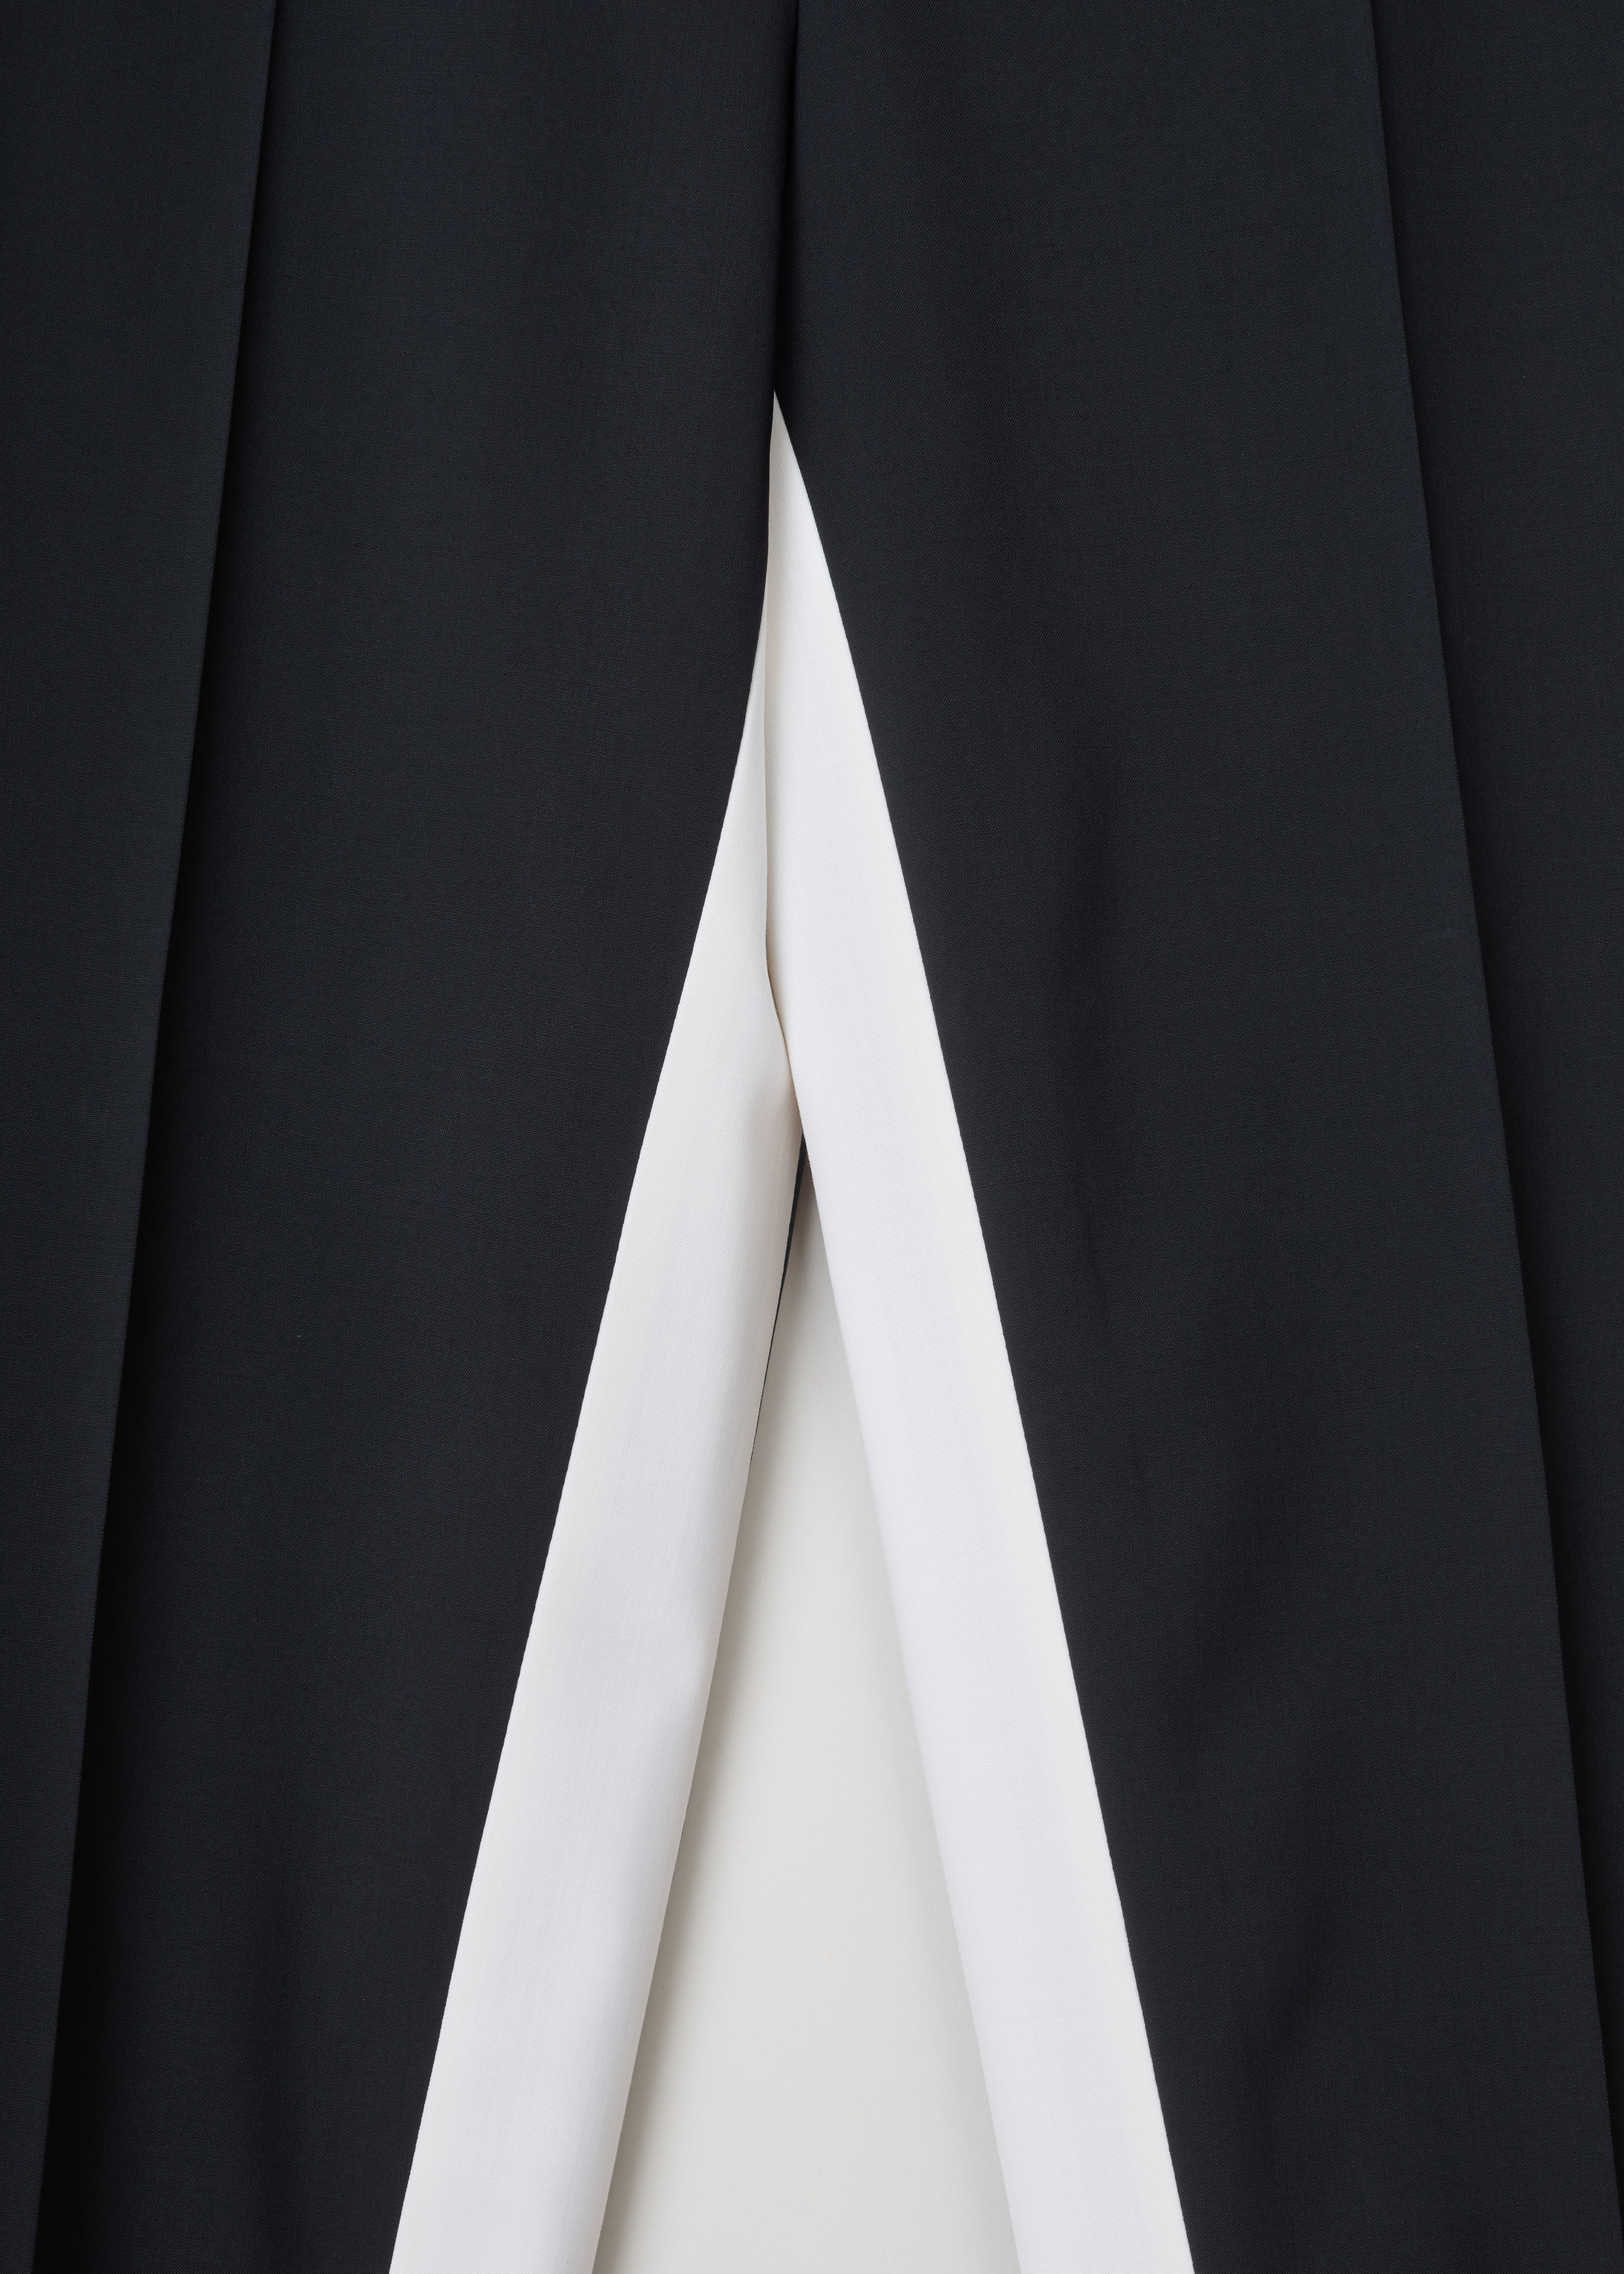 Prada Black and white pants Lana_Leggera_P2798_F0967_Nero_Bianco nero bianco detail. Black trousers with a white panel on the inside of the legs, centre creases and an invisible zipper on the side.